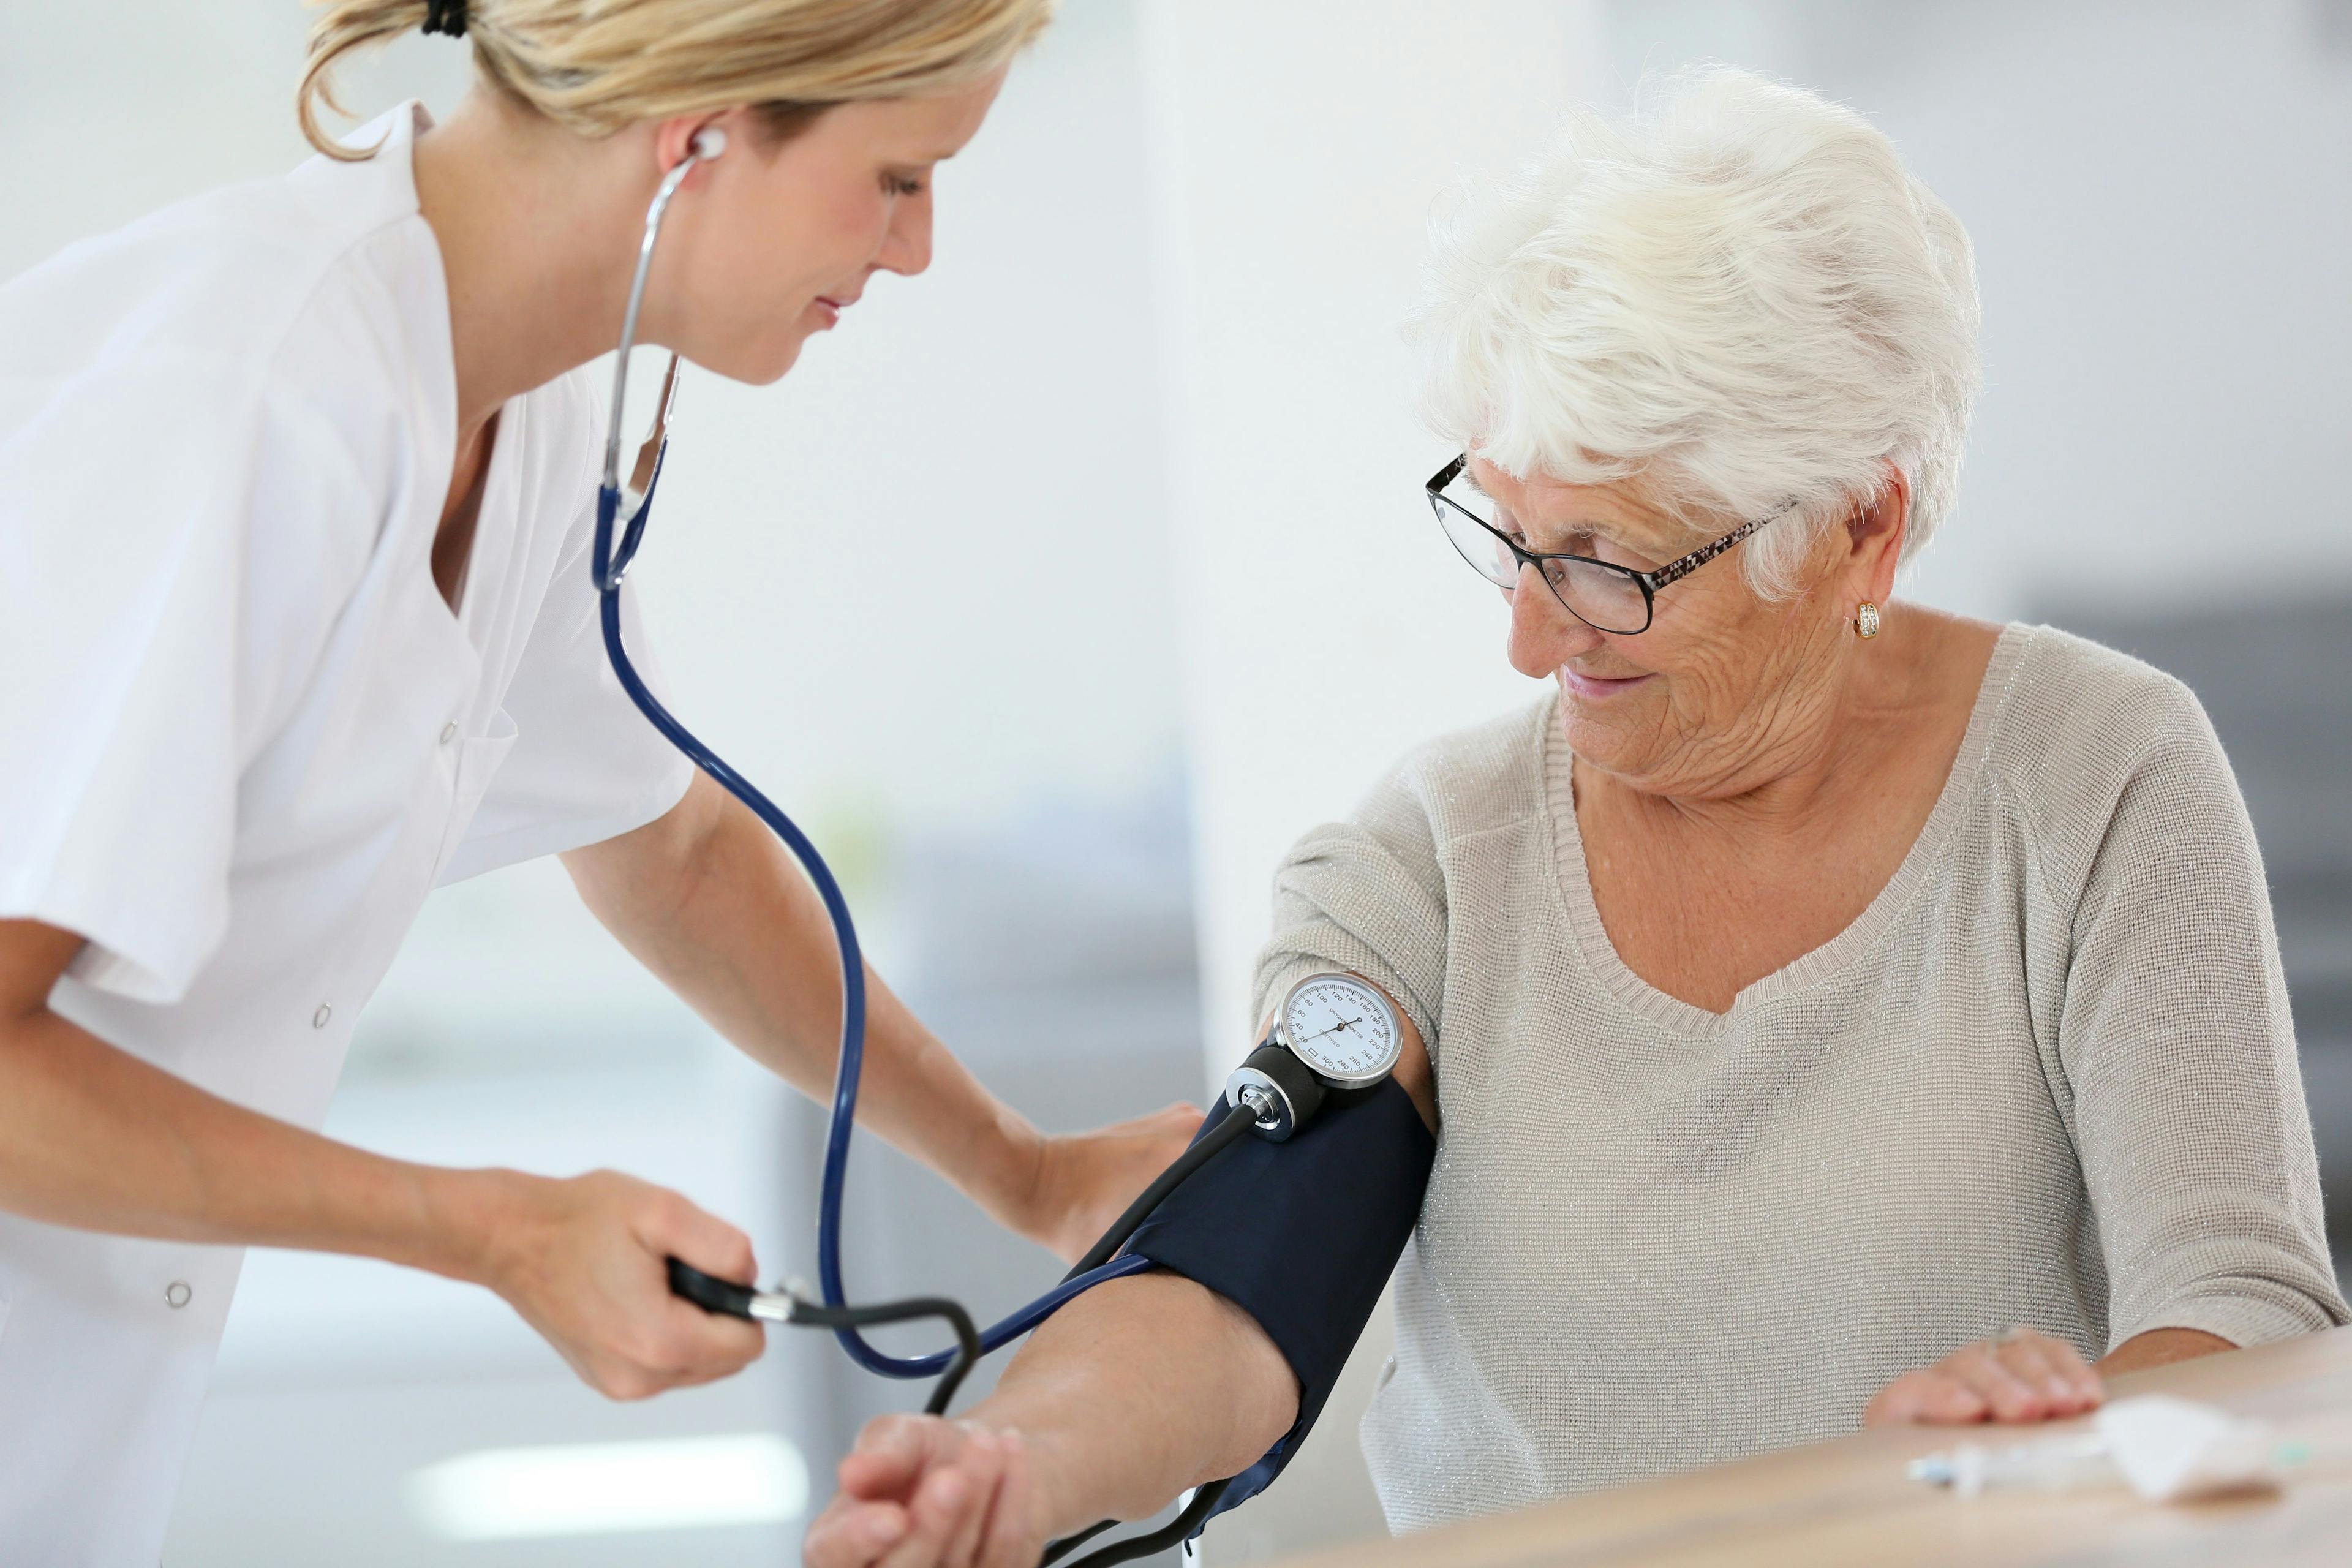 Hospitalizations for Hypertension Increasing in the US